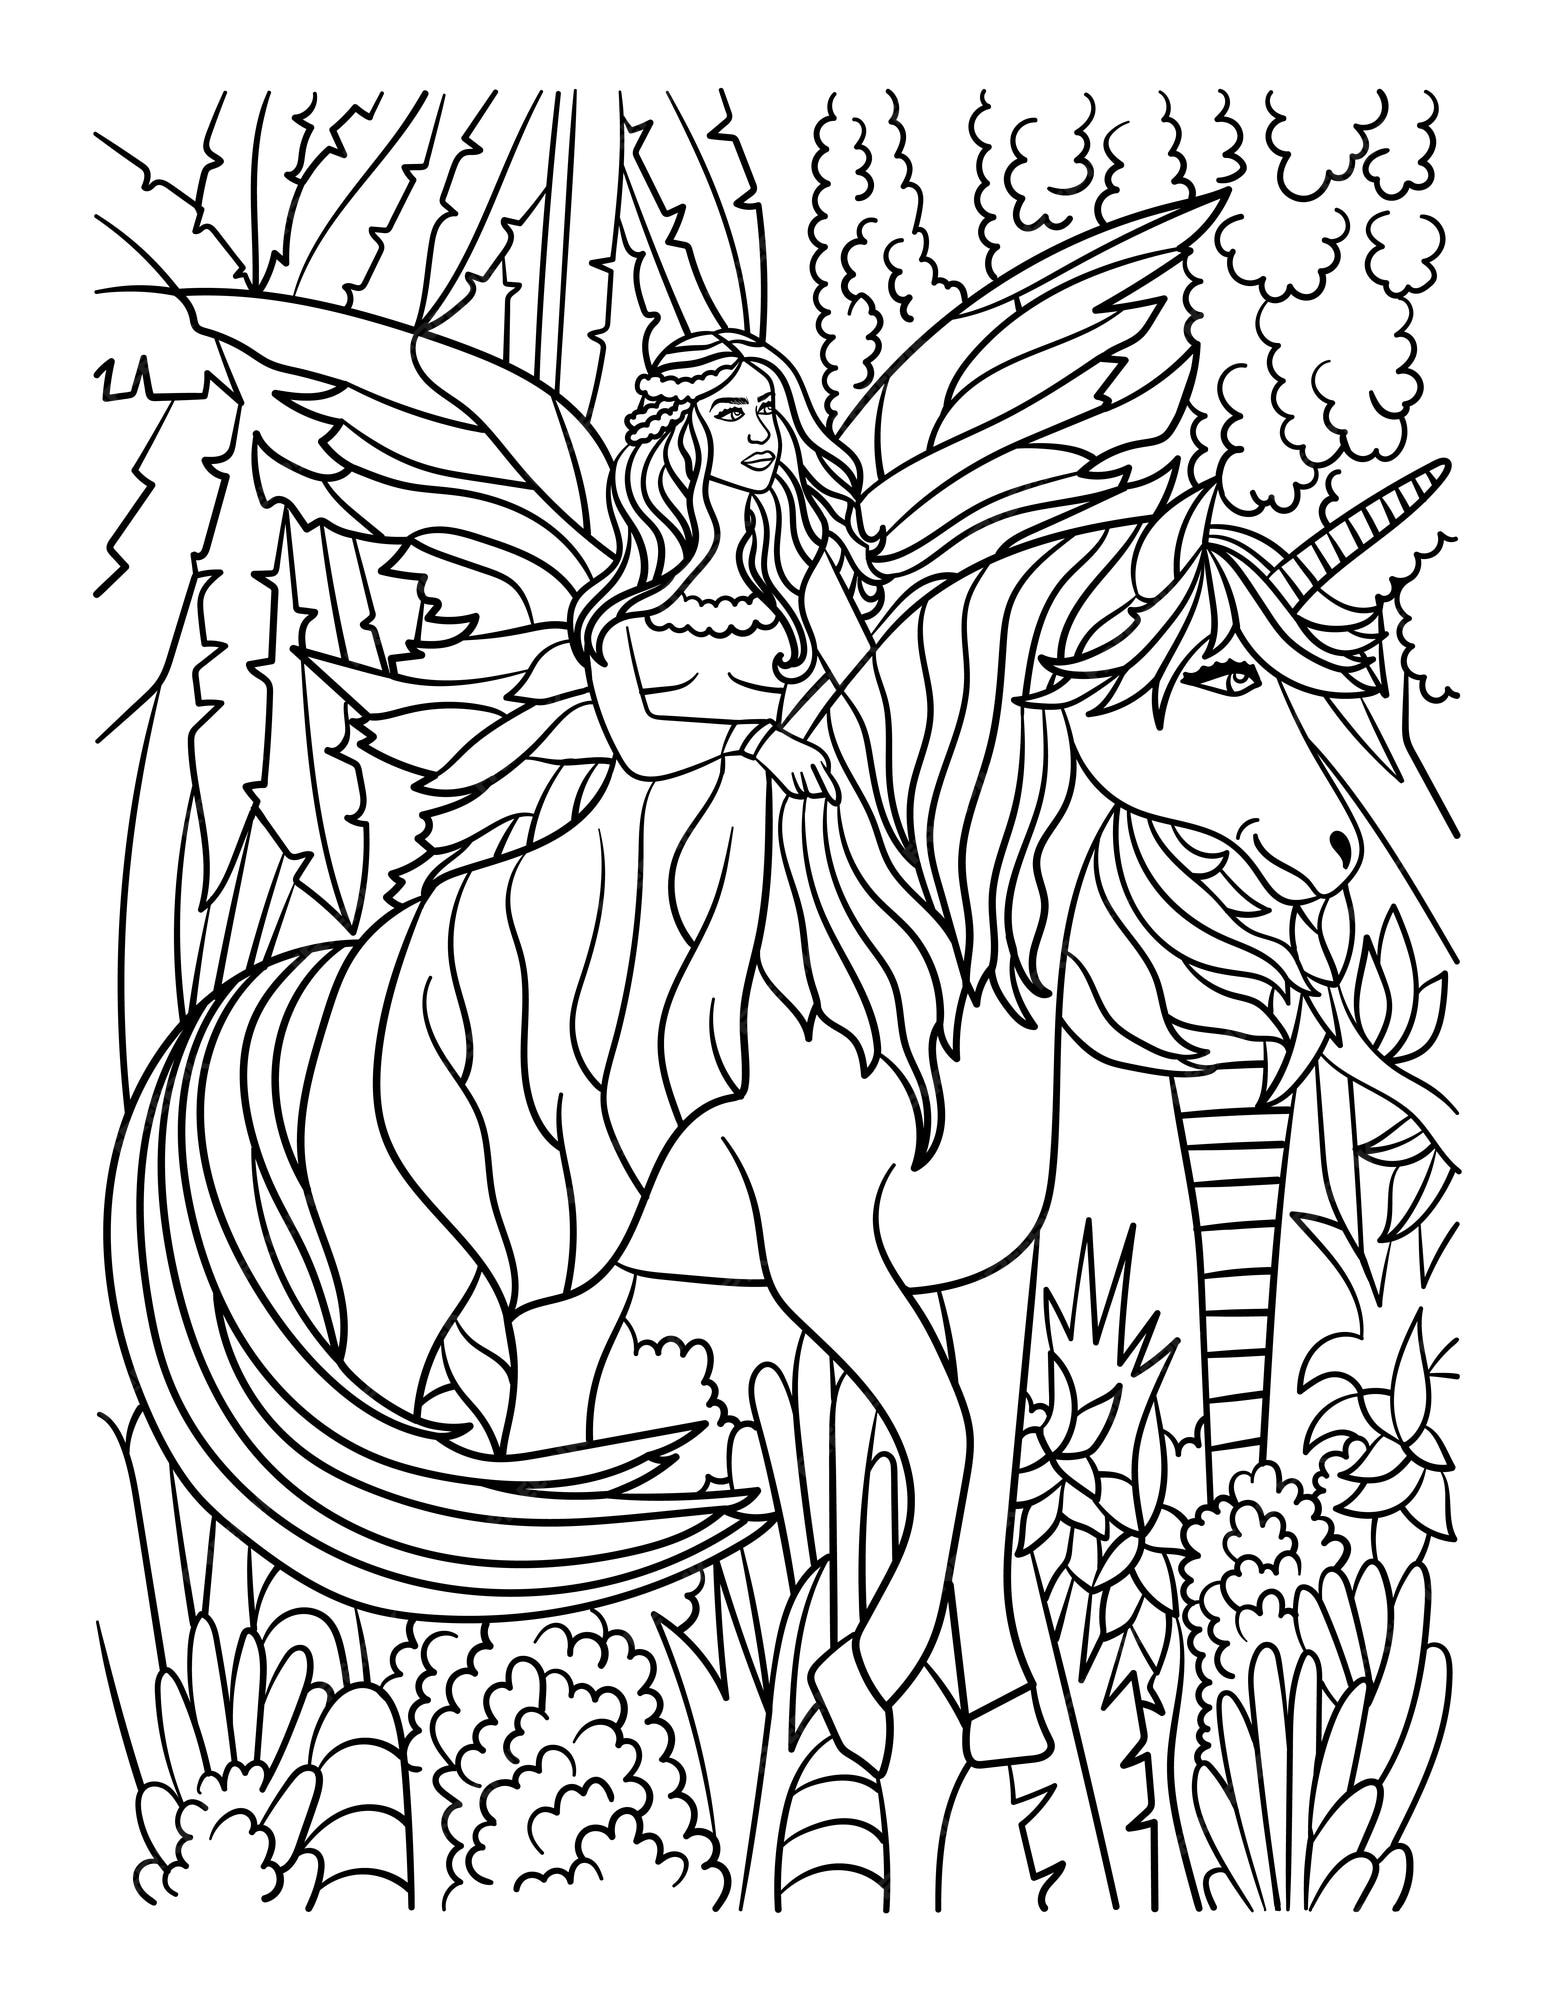 Premium vector fairy riding unicorn coloring page for adults